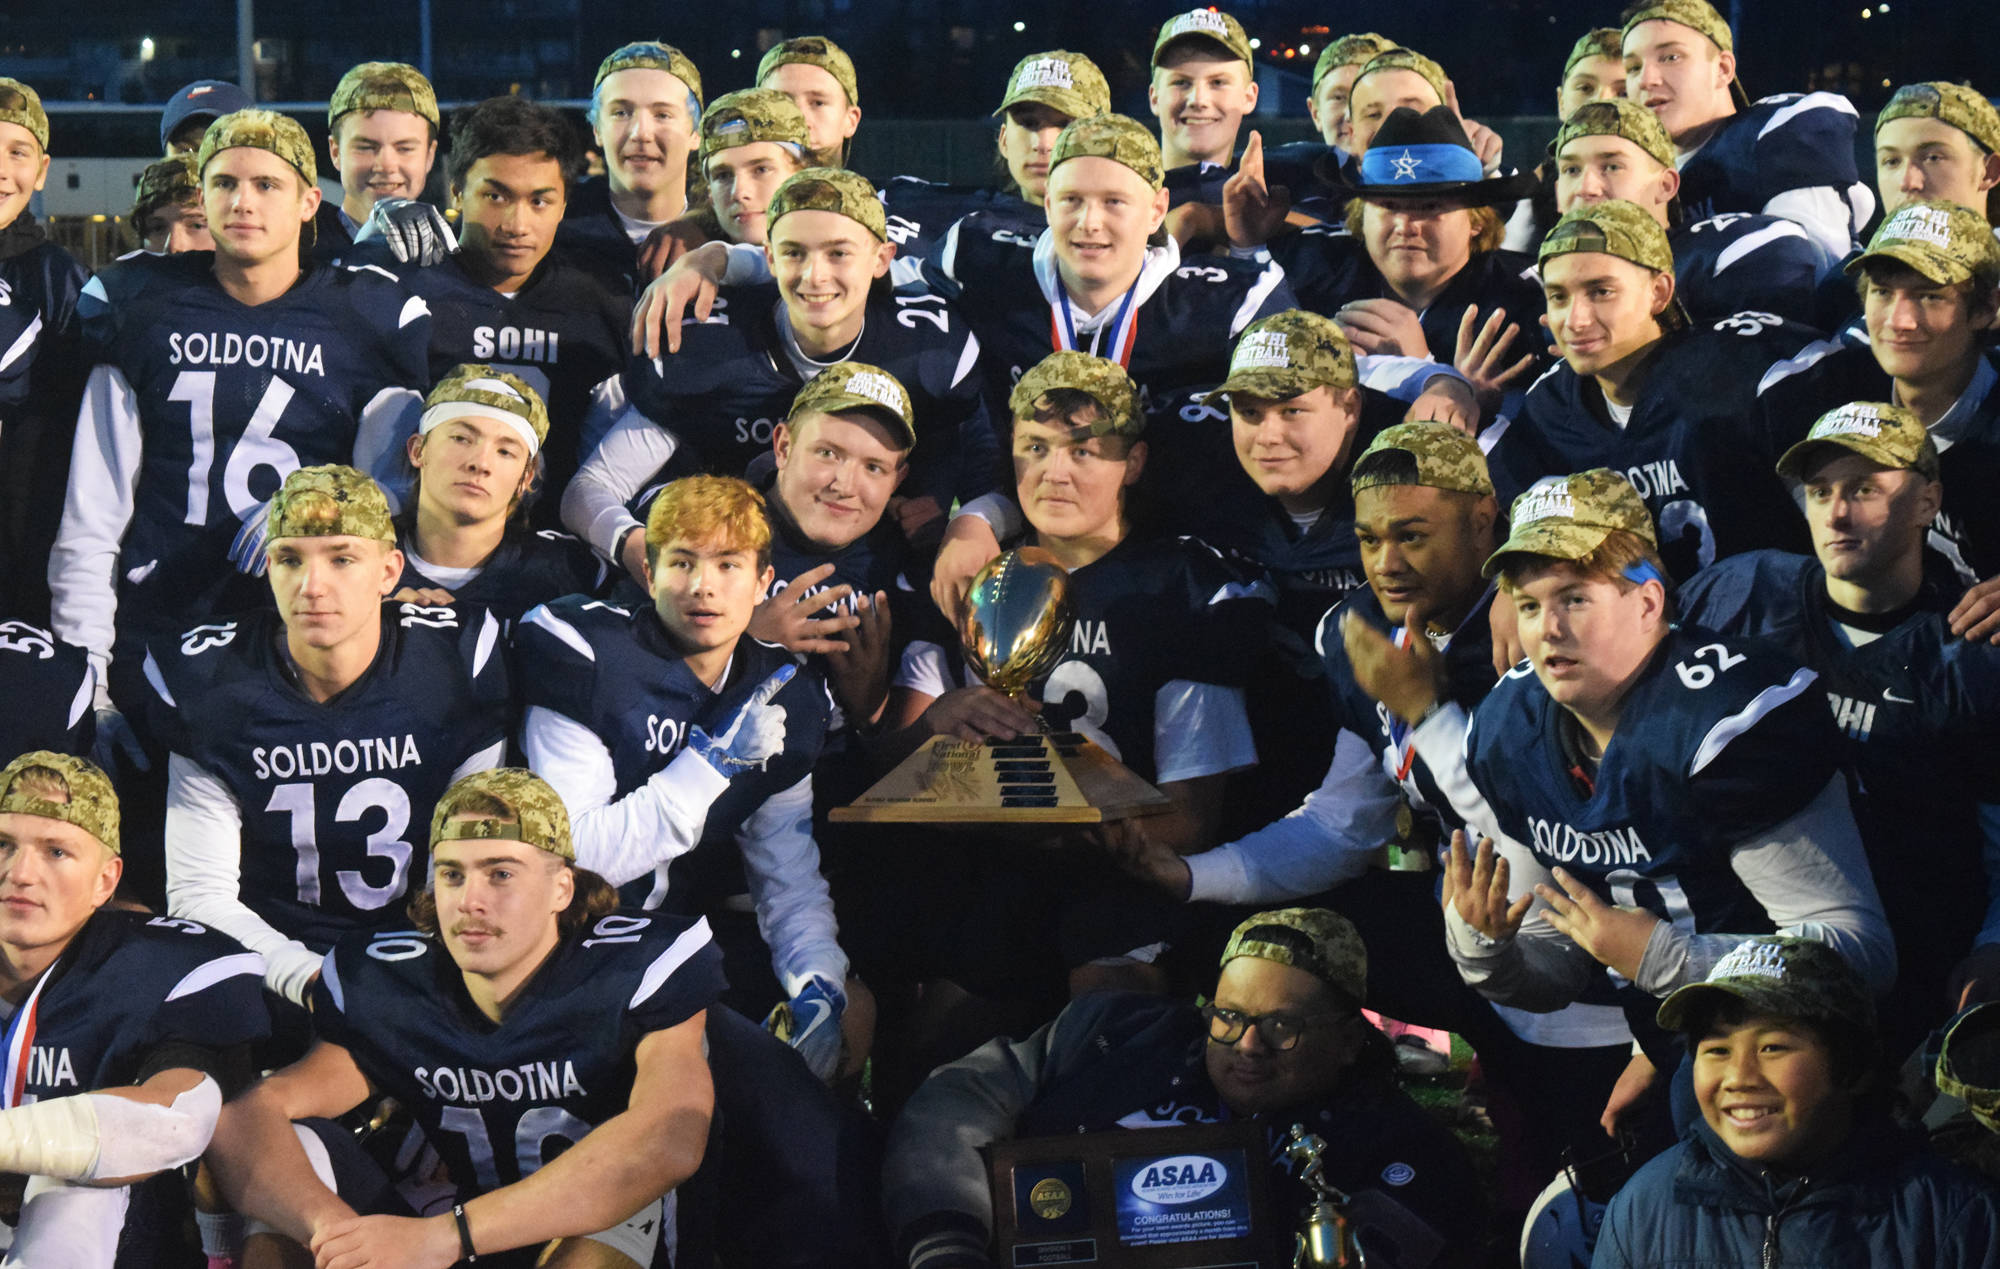 Members of the Soldotna football team pose with the trophy Saturday, Oct. 19, 2019, at the Div. II state football championship at Anchorage Football Stadium in Anchorage, Alaska. Soldotna defeated Lathrop 69-13. (Photo by Joey Klecka/Peninsula Clarion)